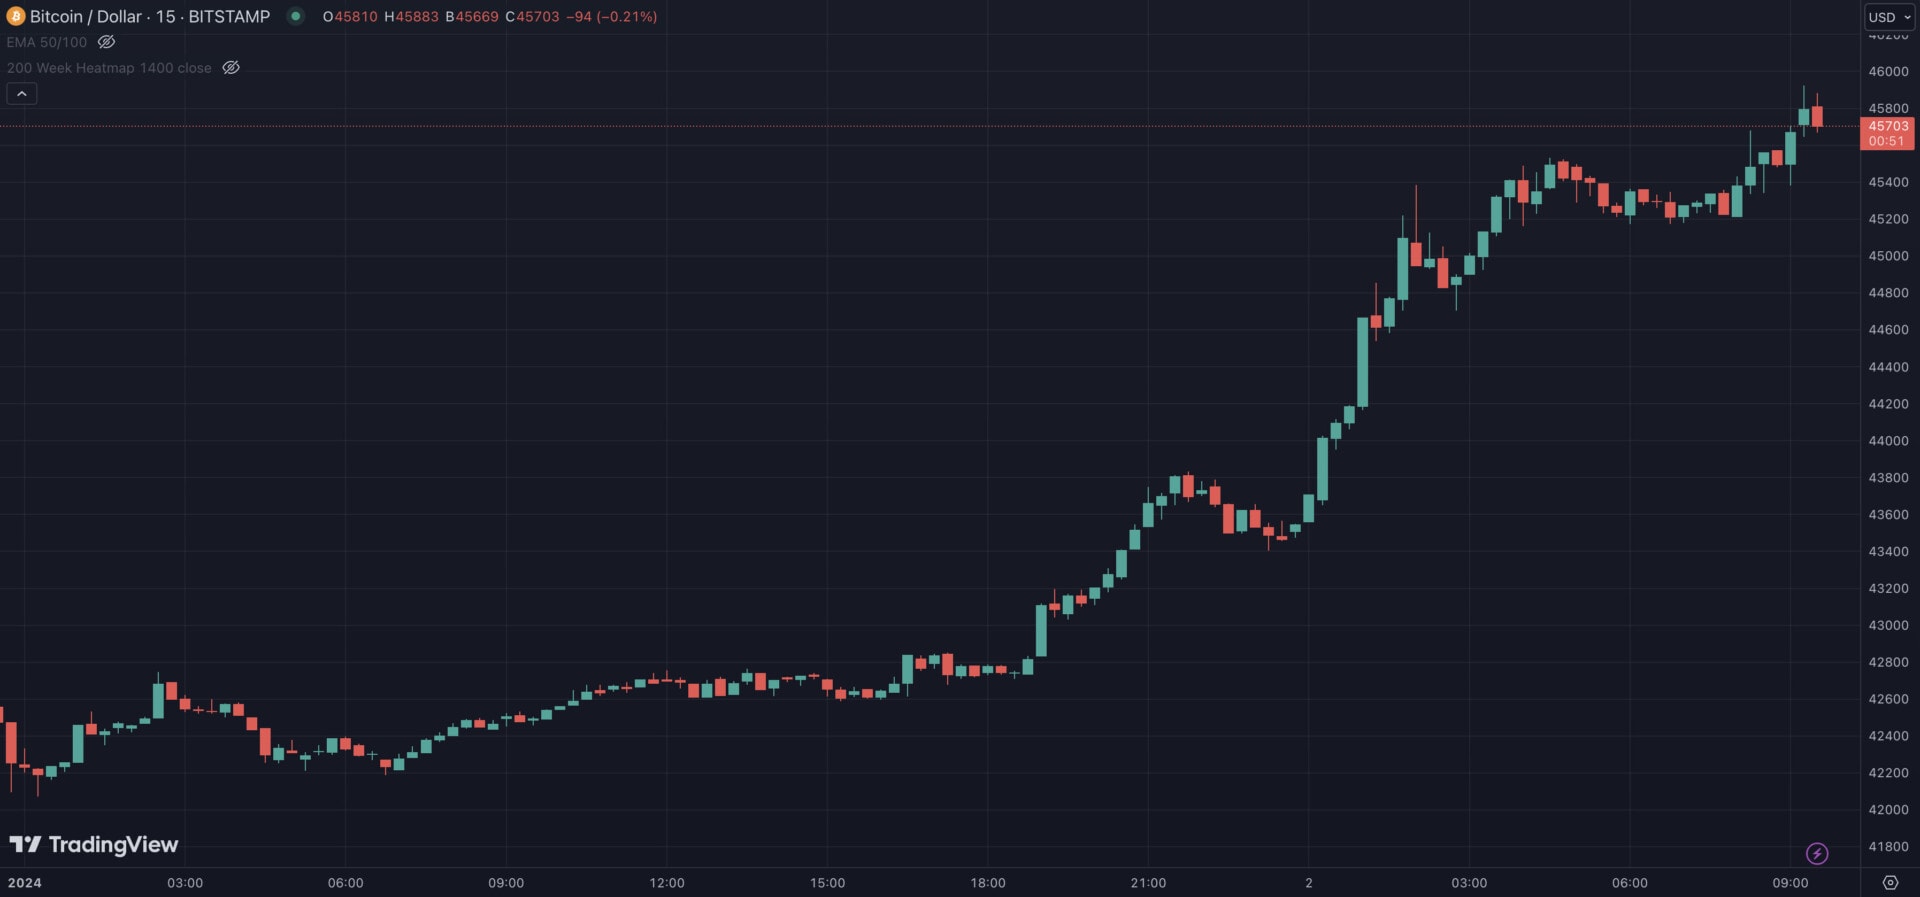 It is “theoretically possible” that Bitcoin will reach $100,000 in 2024